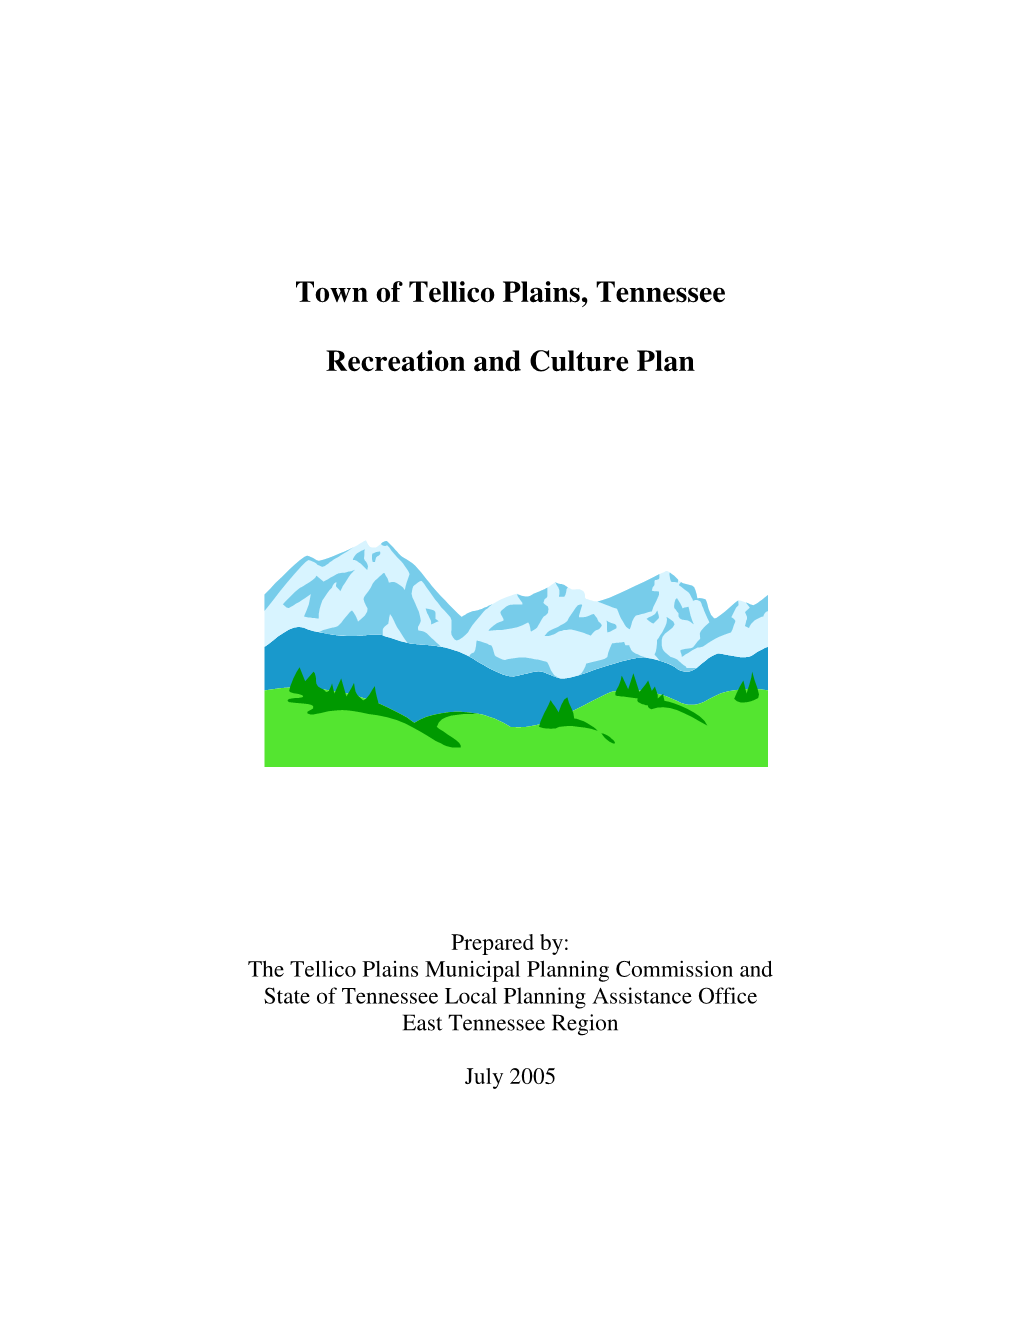 Town of Tellico Plains, Tennessee Recreation and Culture Plan